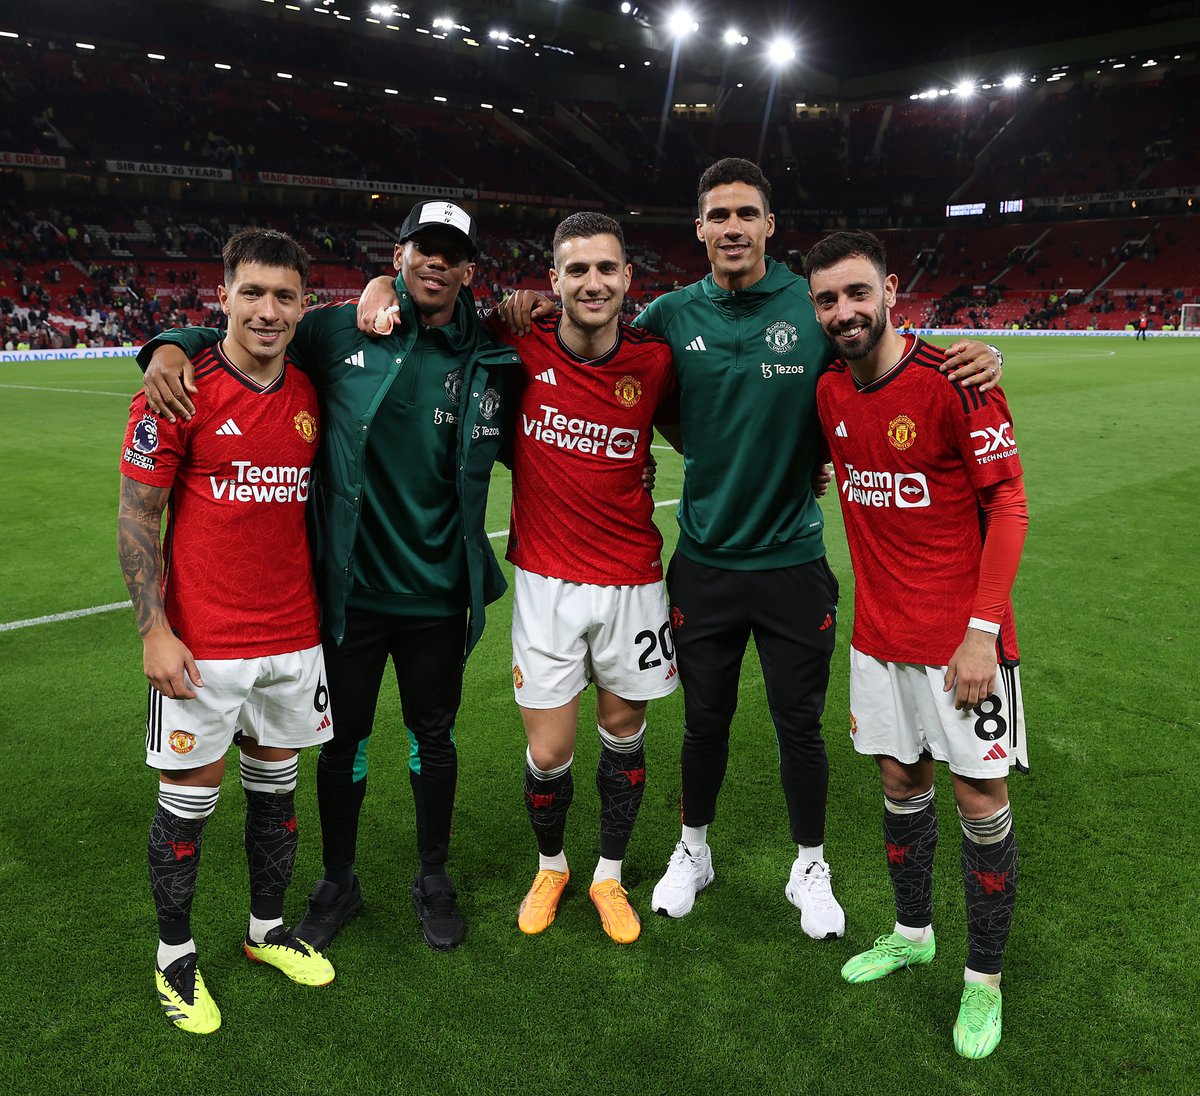 Friends for life 🥰 #MUFC